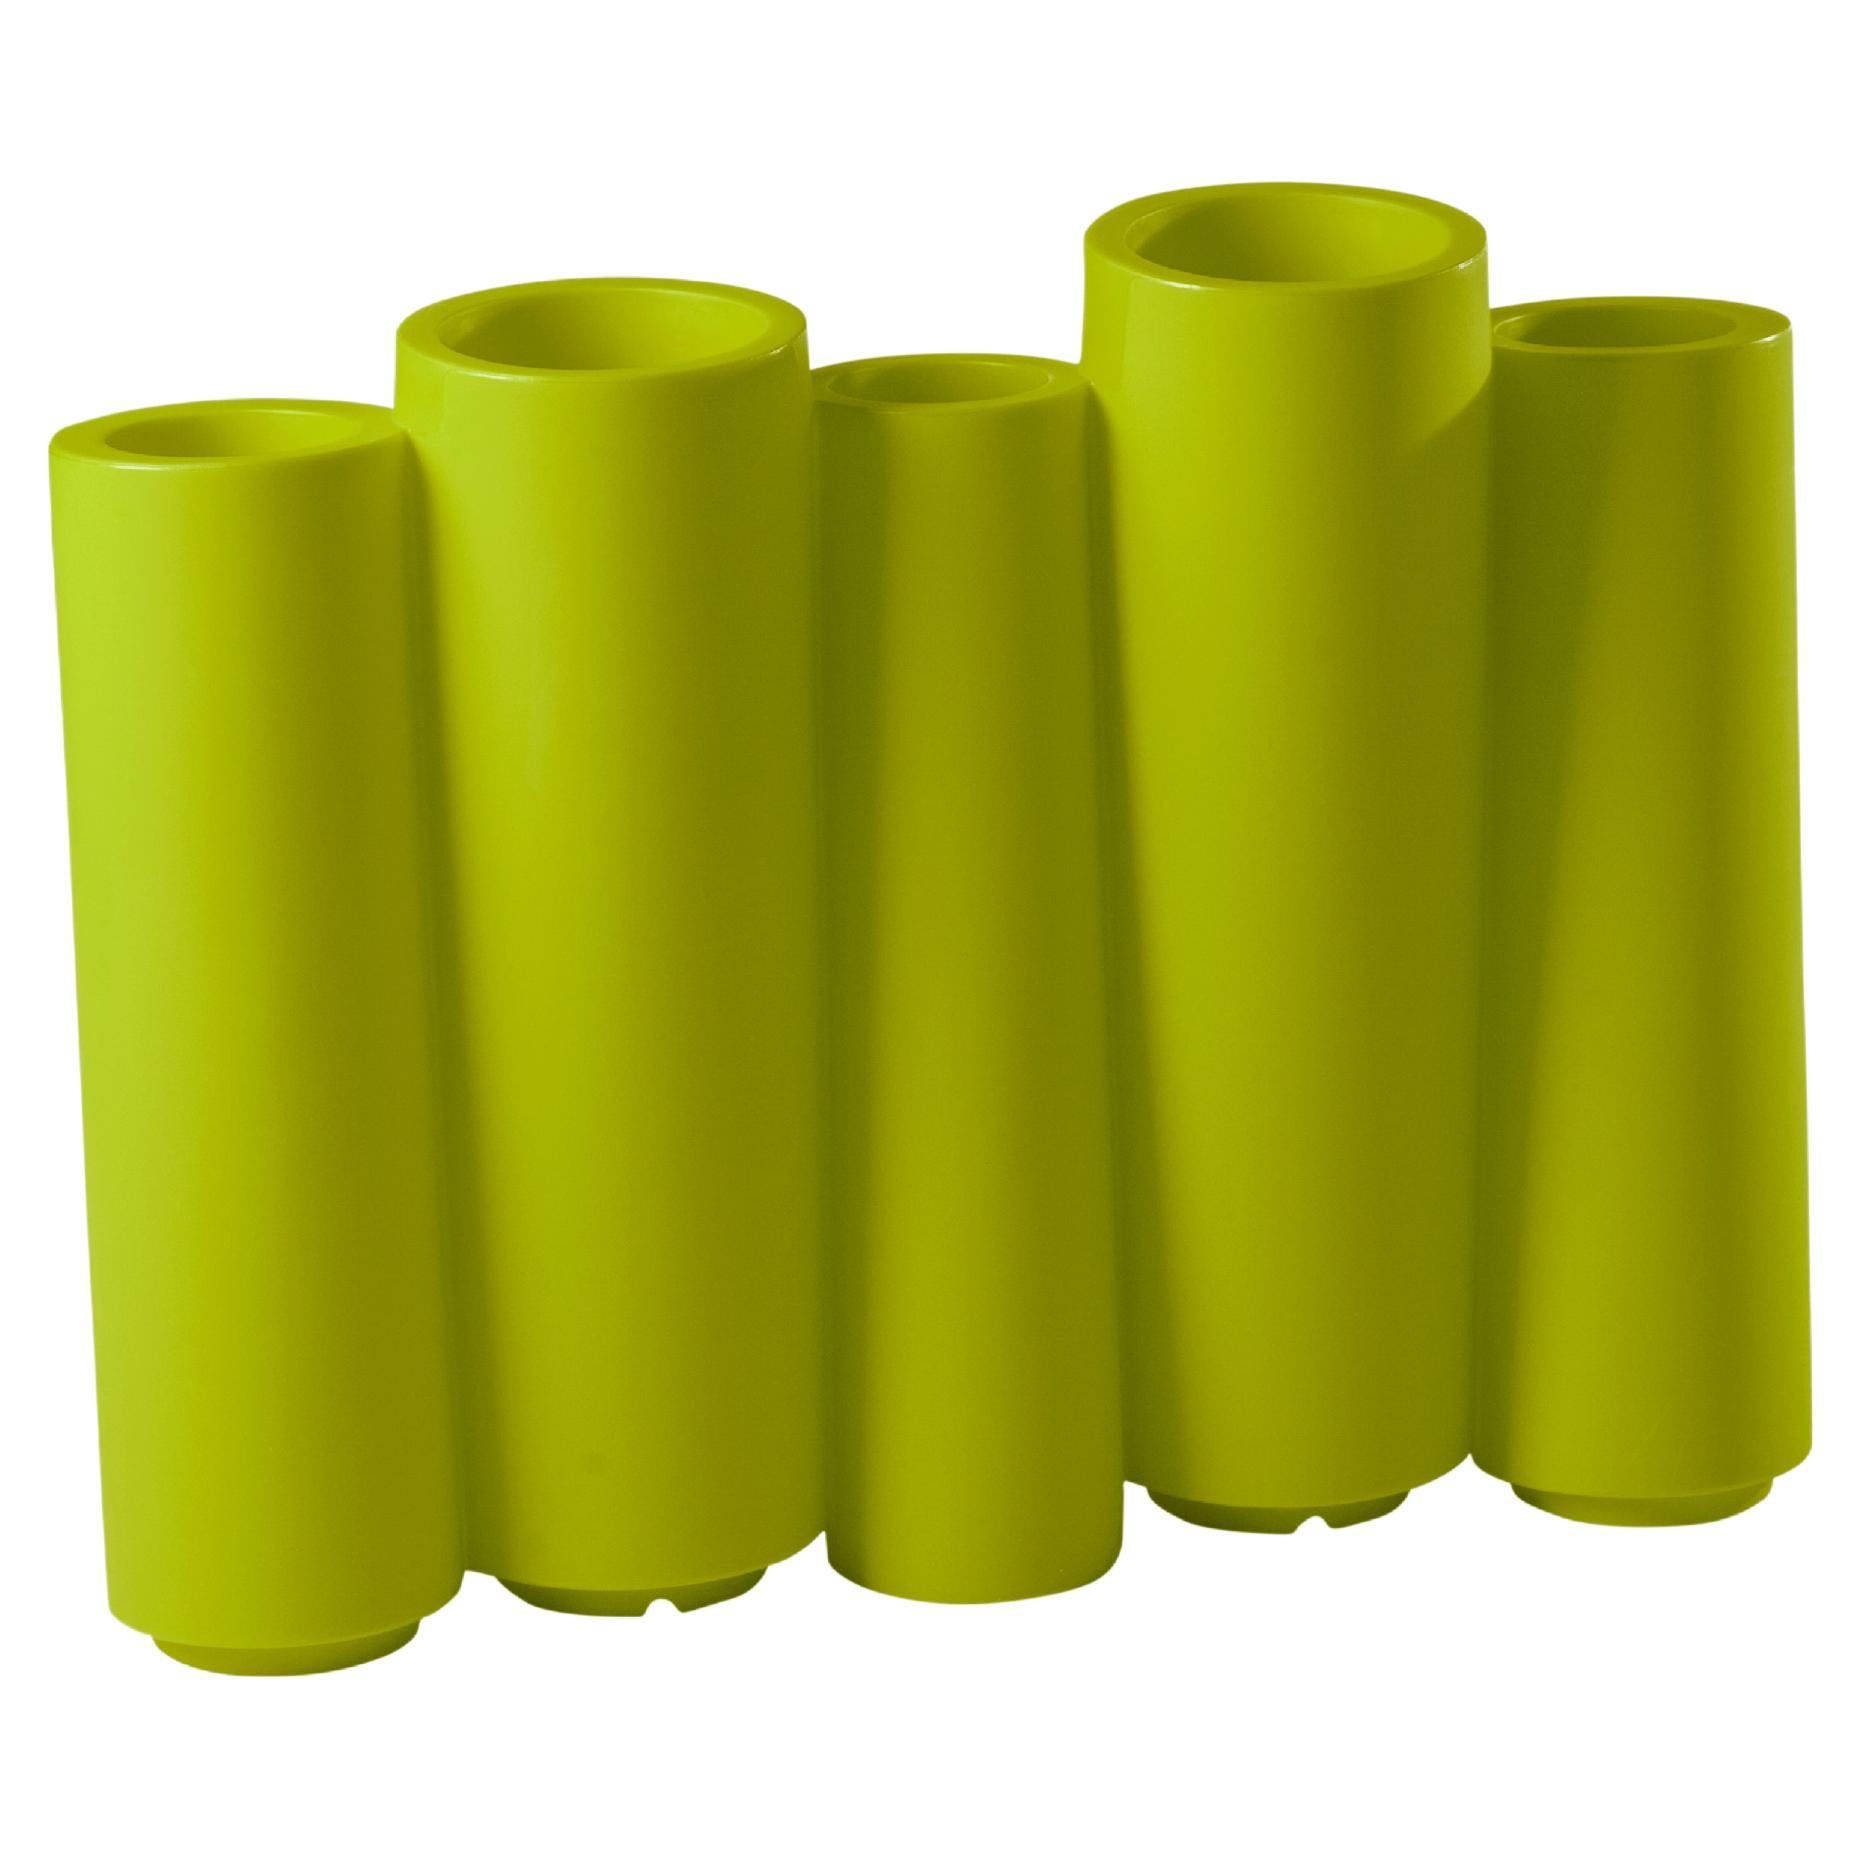 Slide Design Bamboo Cachepot in Lime Green by Tous Les Trois